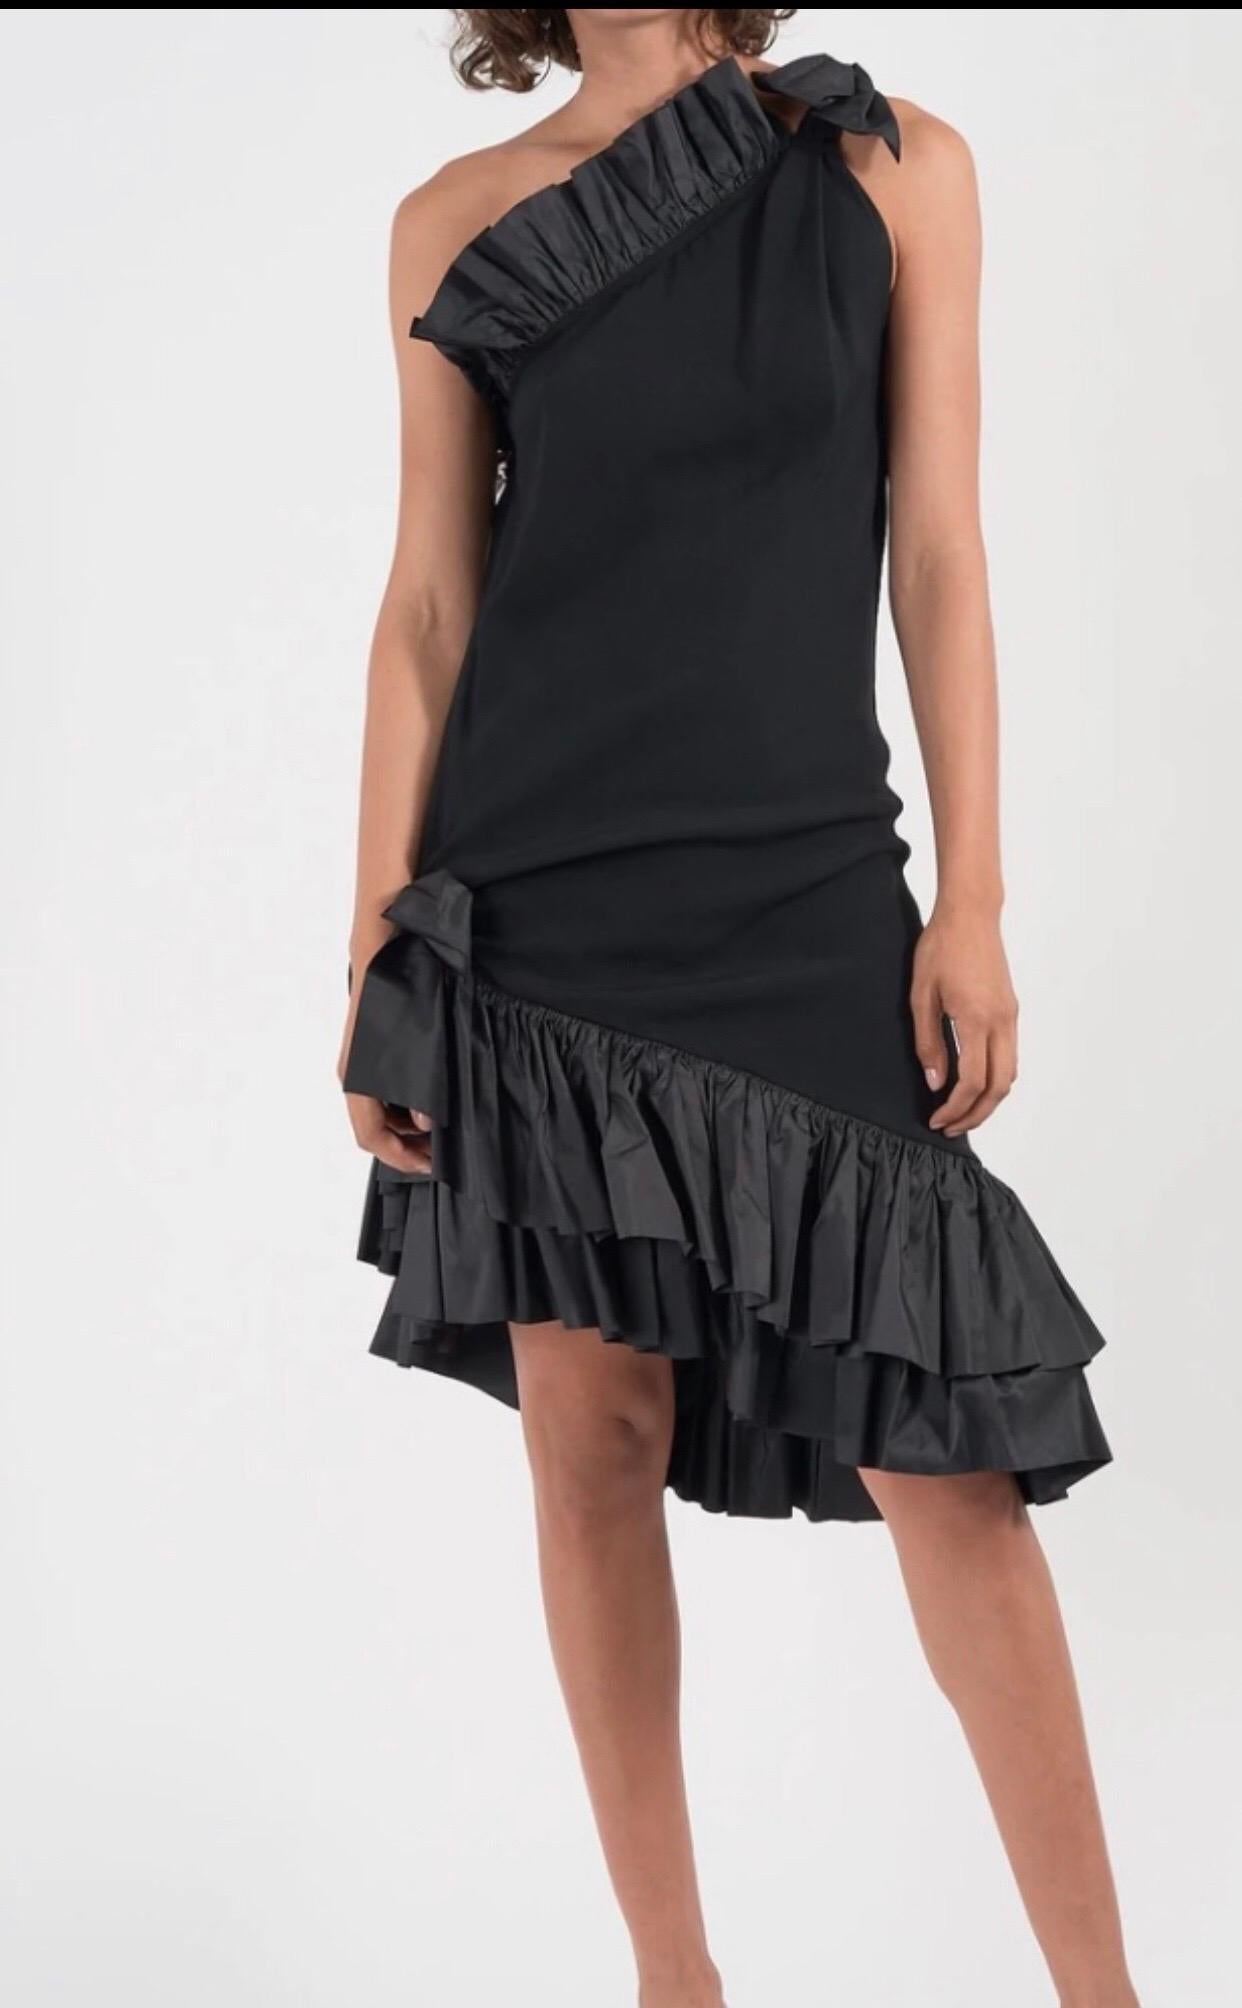 Yves Saint Laurent Rive Gauche black one shoulder sleeveless cocktail dress with ruffles. Condition: Excellent. 
Size M/ US 6/ FR38
34